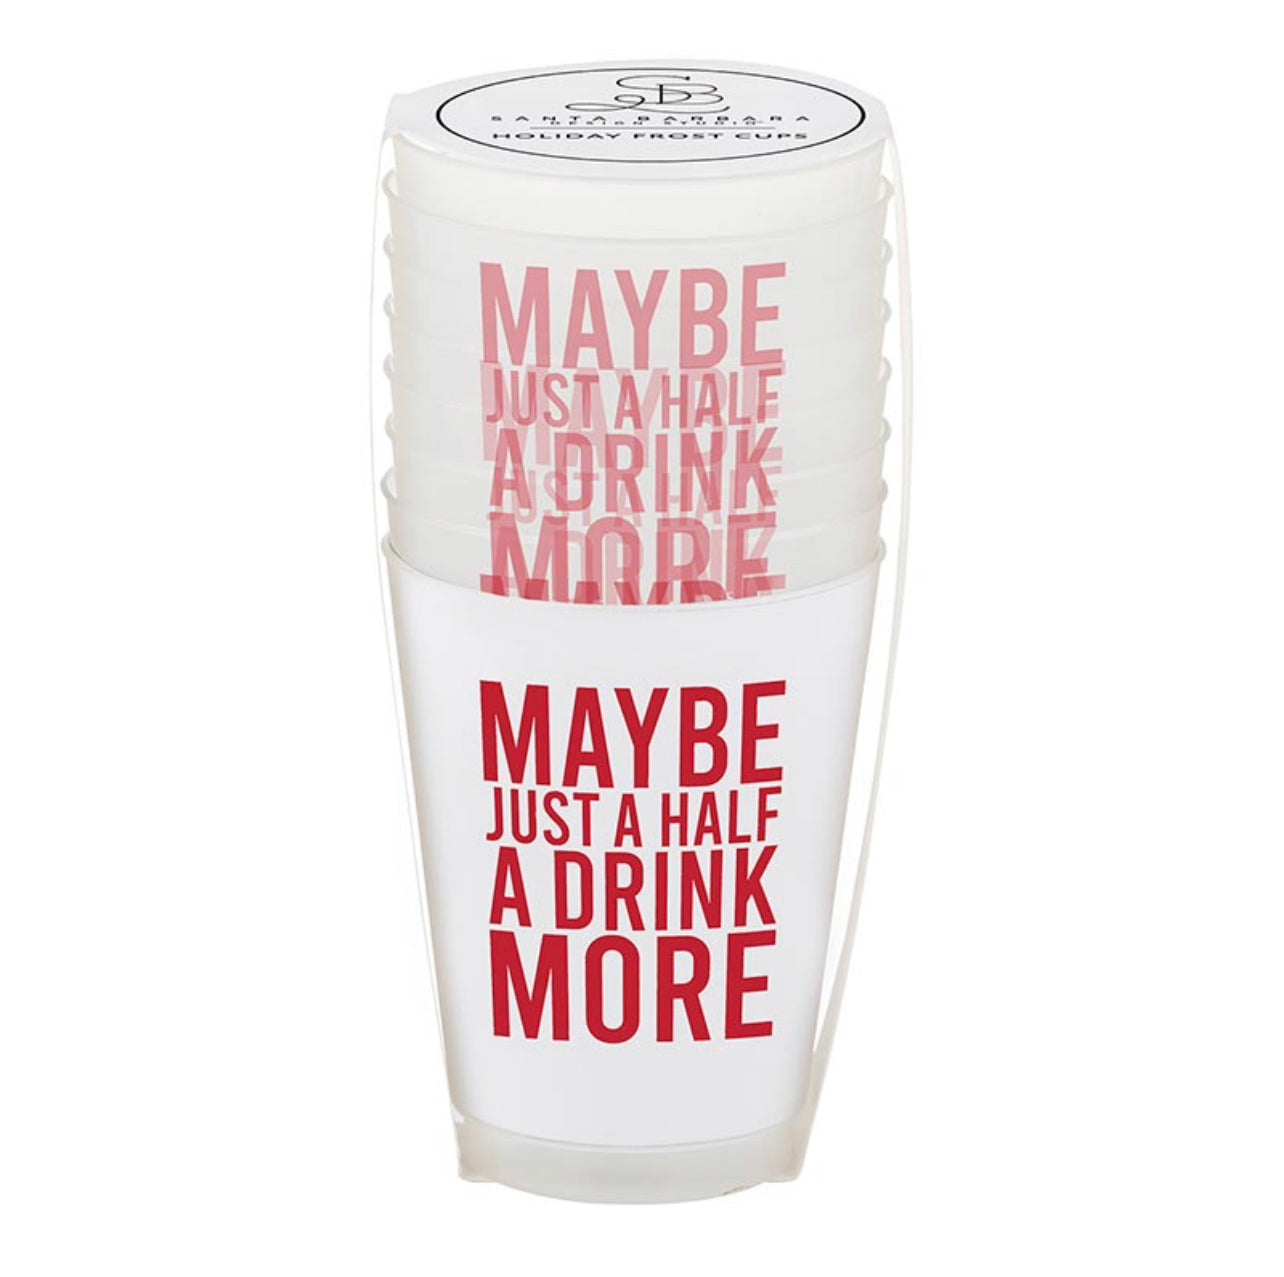 white frosted plastic christmas cups with red script that says "maybe just a half a drink more" comes in a set of 8